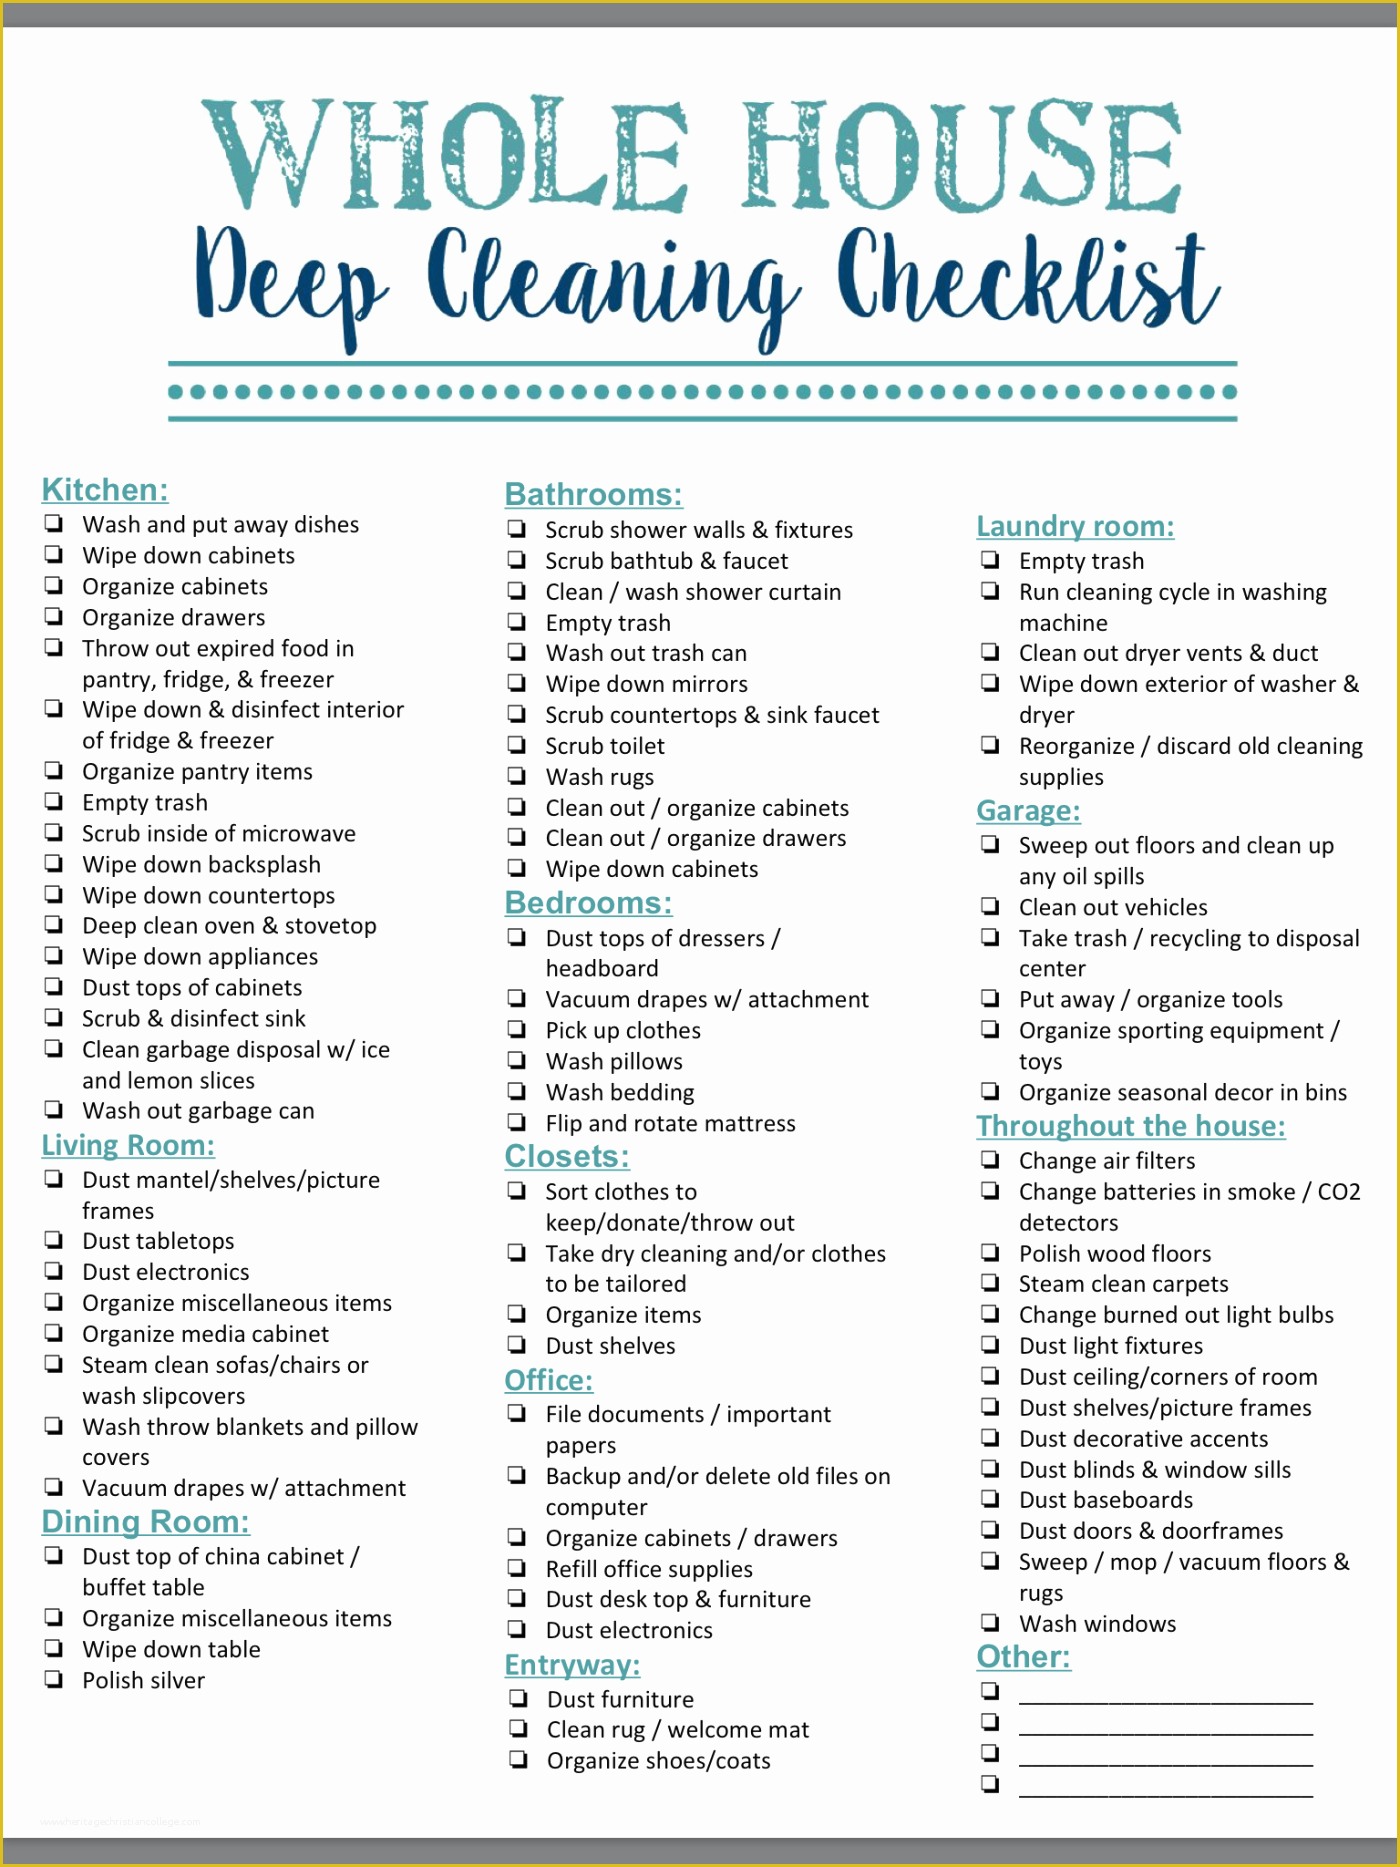 House Cleaning Checklist Template Free Of 40 Helpful House Cleaning Checklists for You